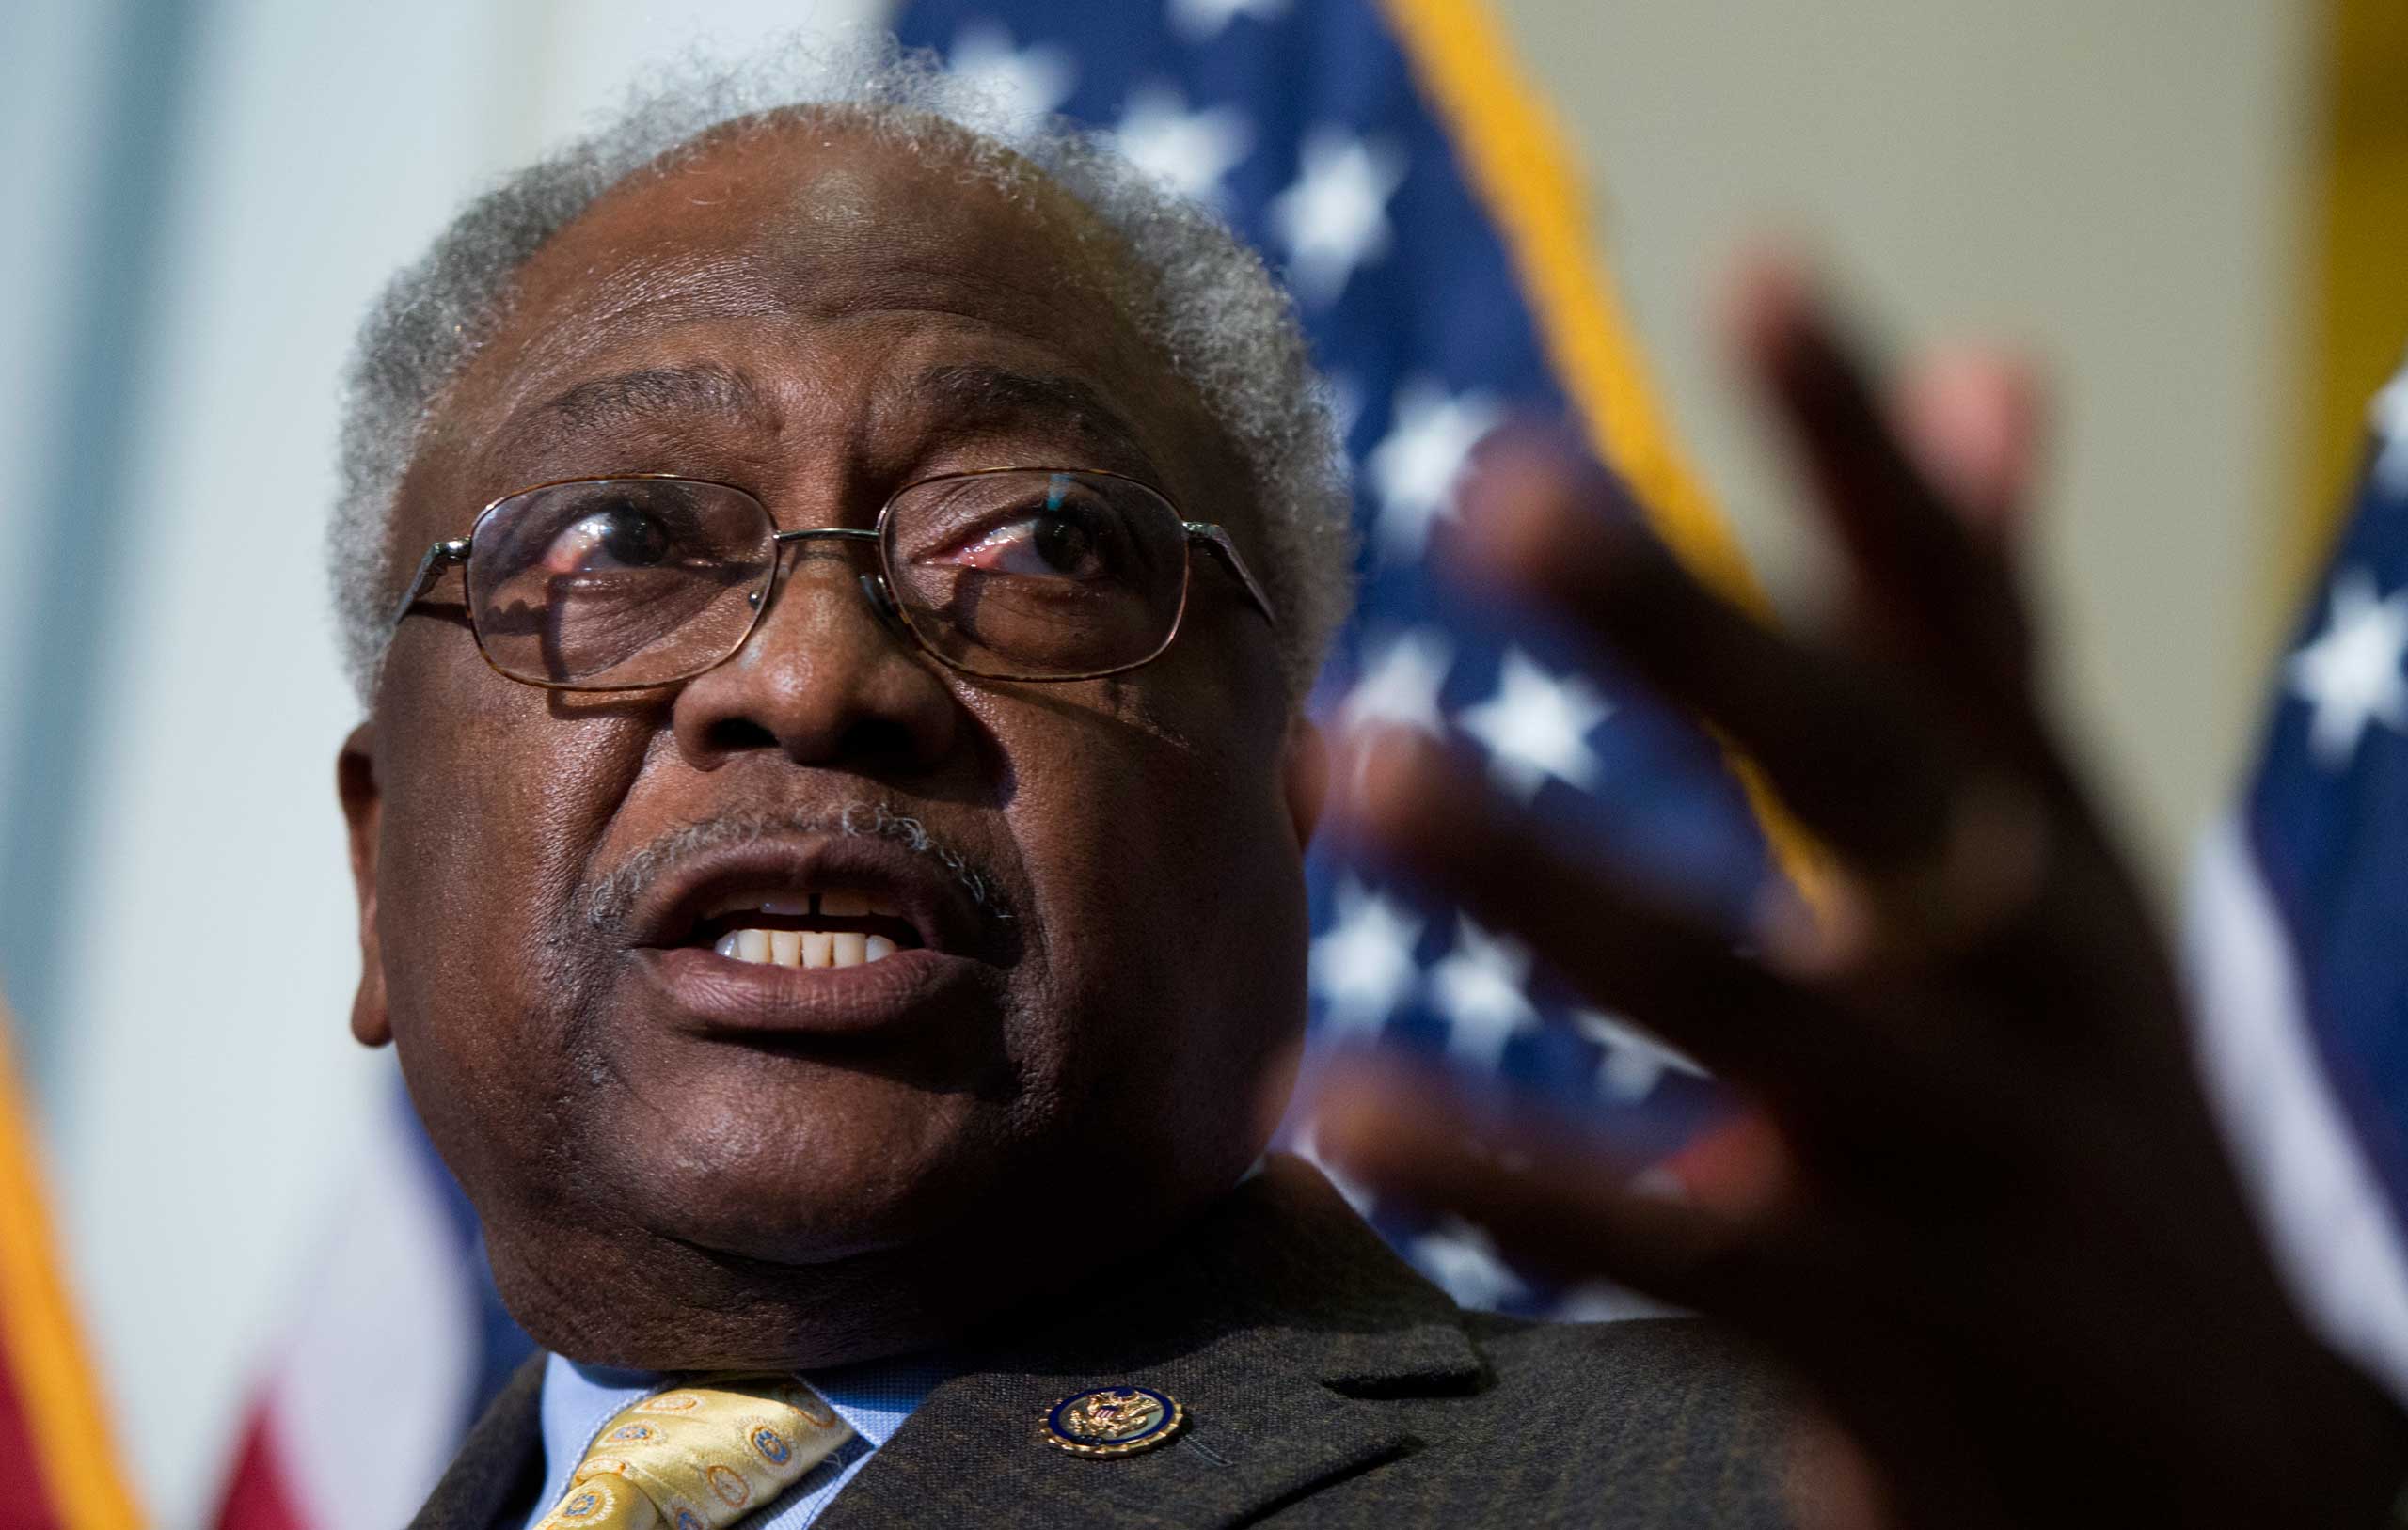 UNITED STATES - NOVEMBER 29:  Rep. James Clyburn, D-S.C., speaks at a news conference after the 113th Congress Democratic Caucus Organizational Meeting in Cannon Building. (Photo By Tom Williams/CQ Roll Call) (Tom Williams—Getty Images)